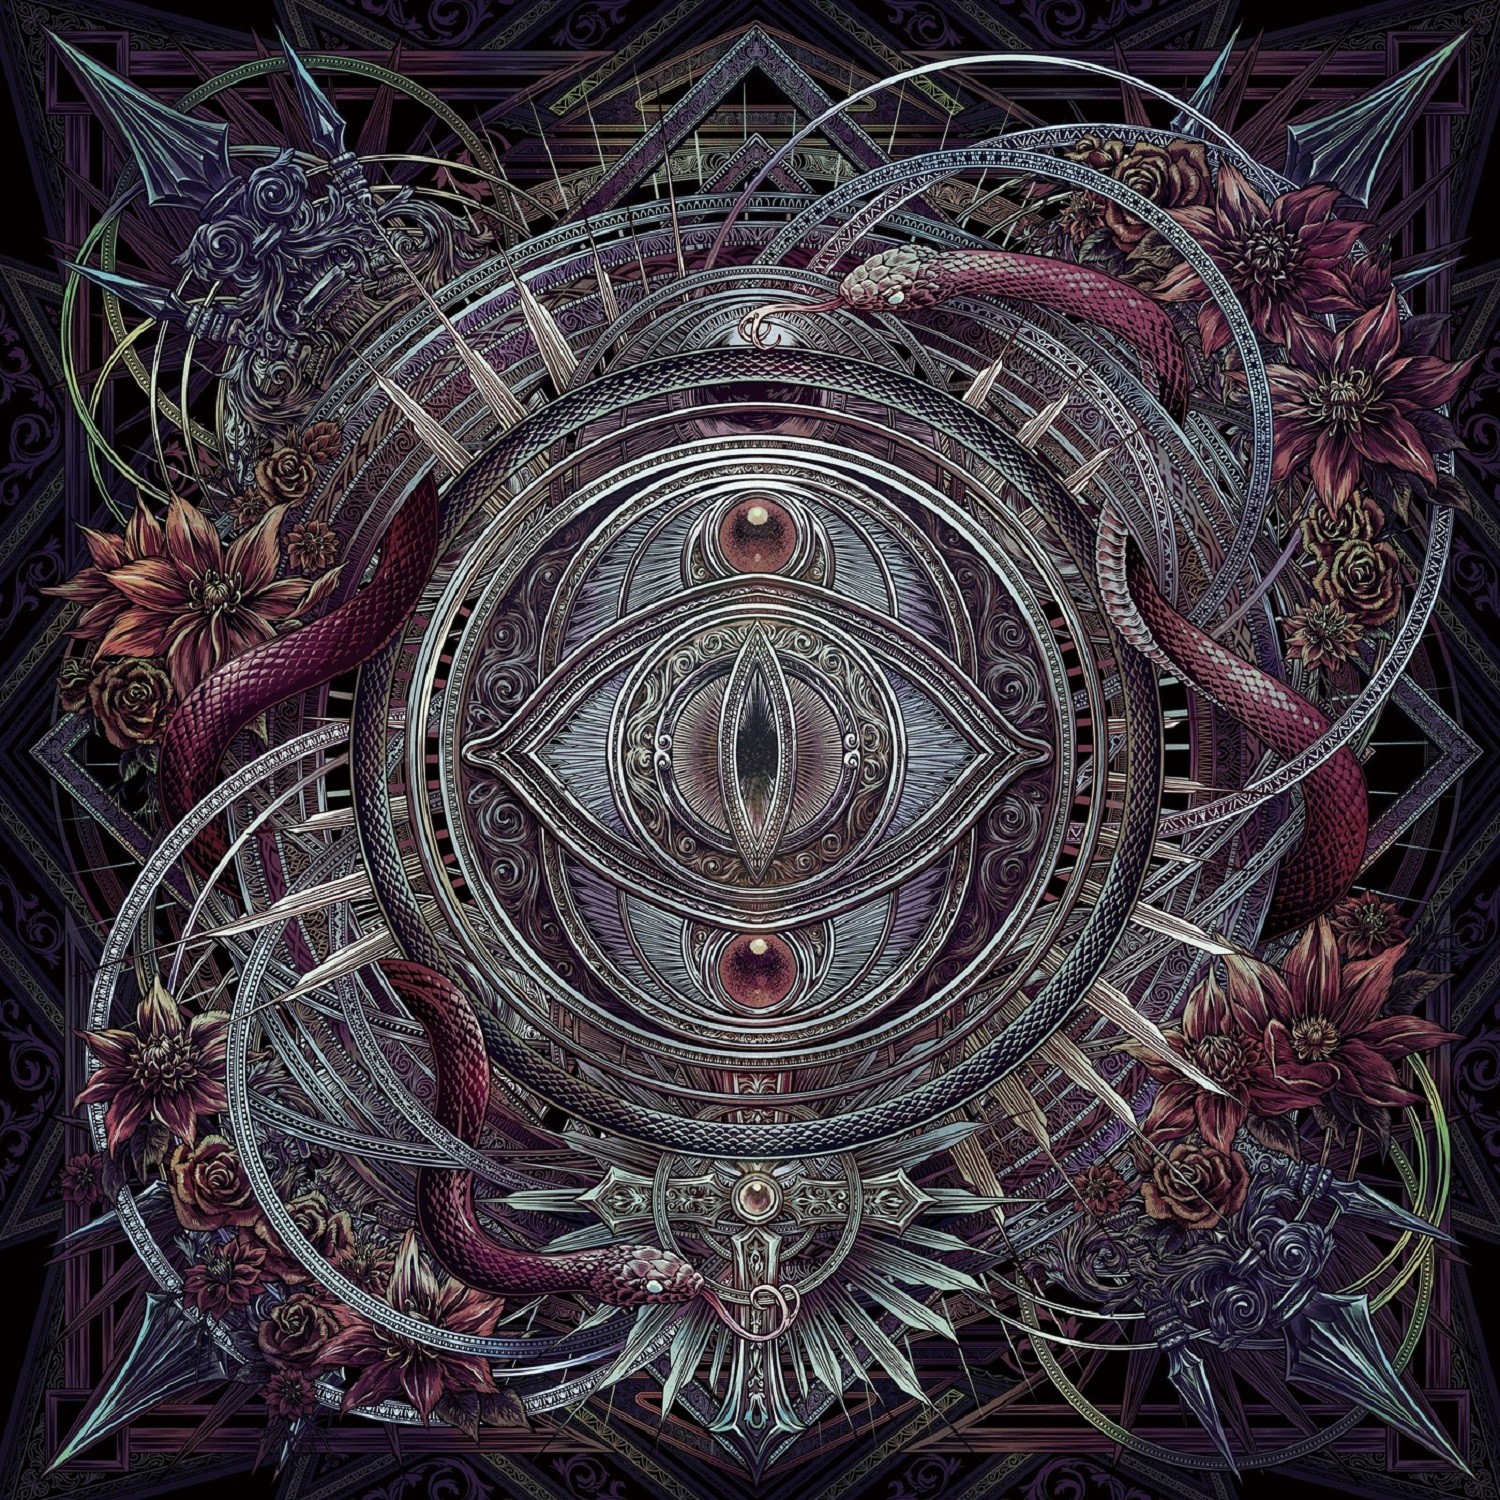 Nocturnal Bloodlust – The Wasteland [FLAC / CD] [2020.12.16]